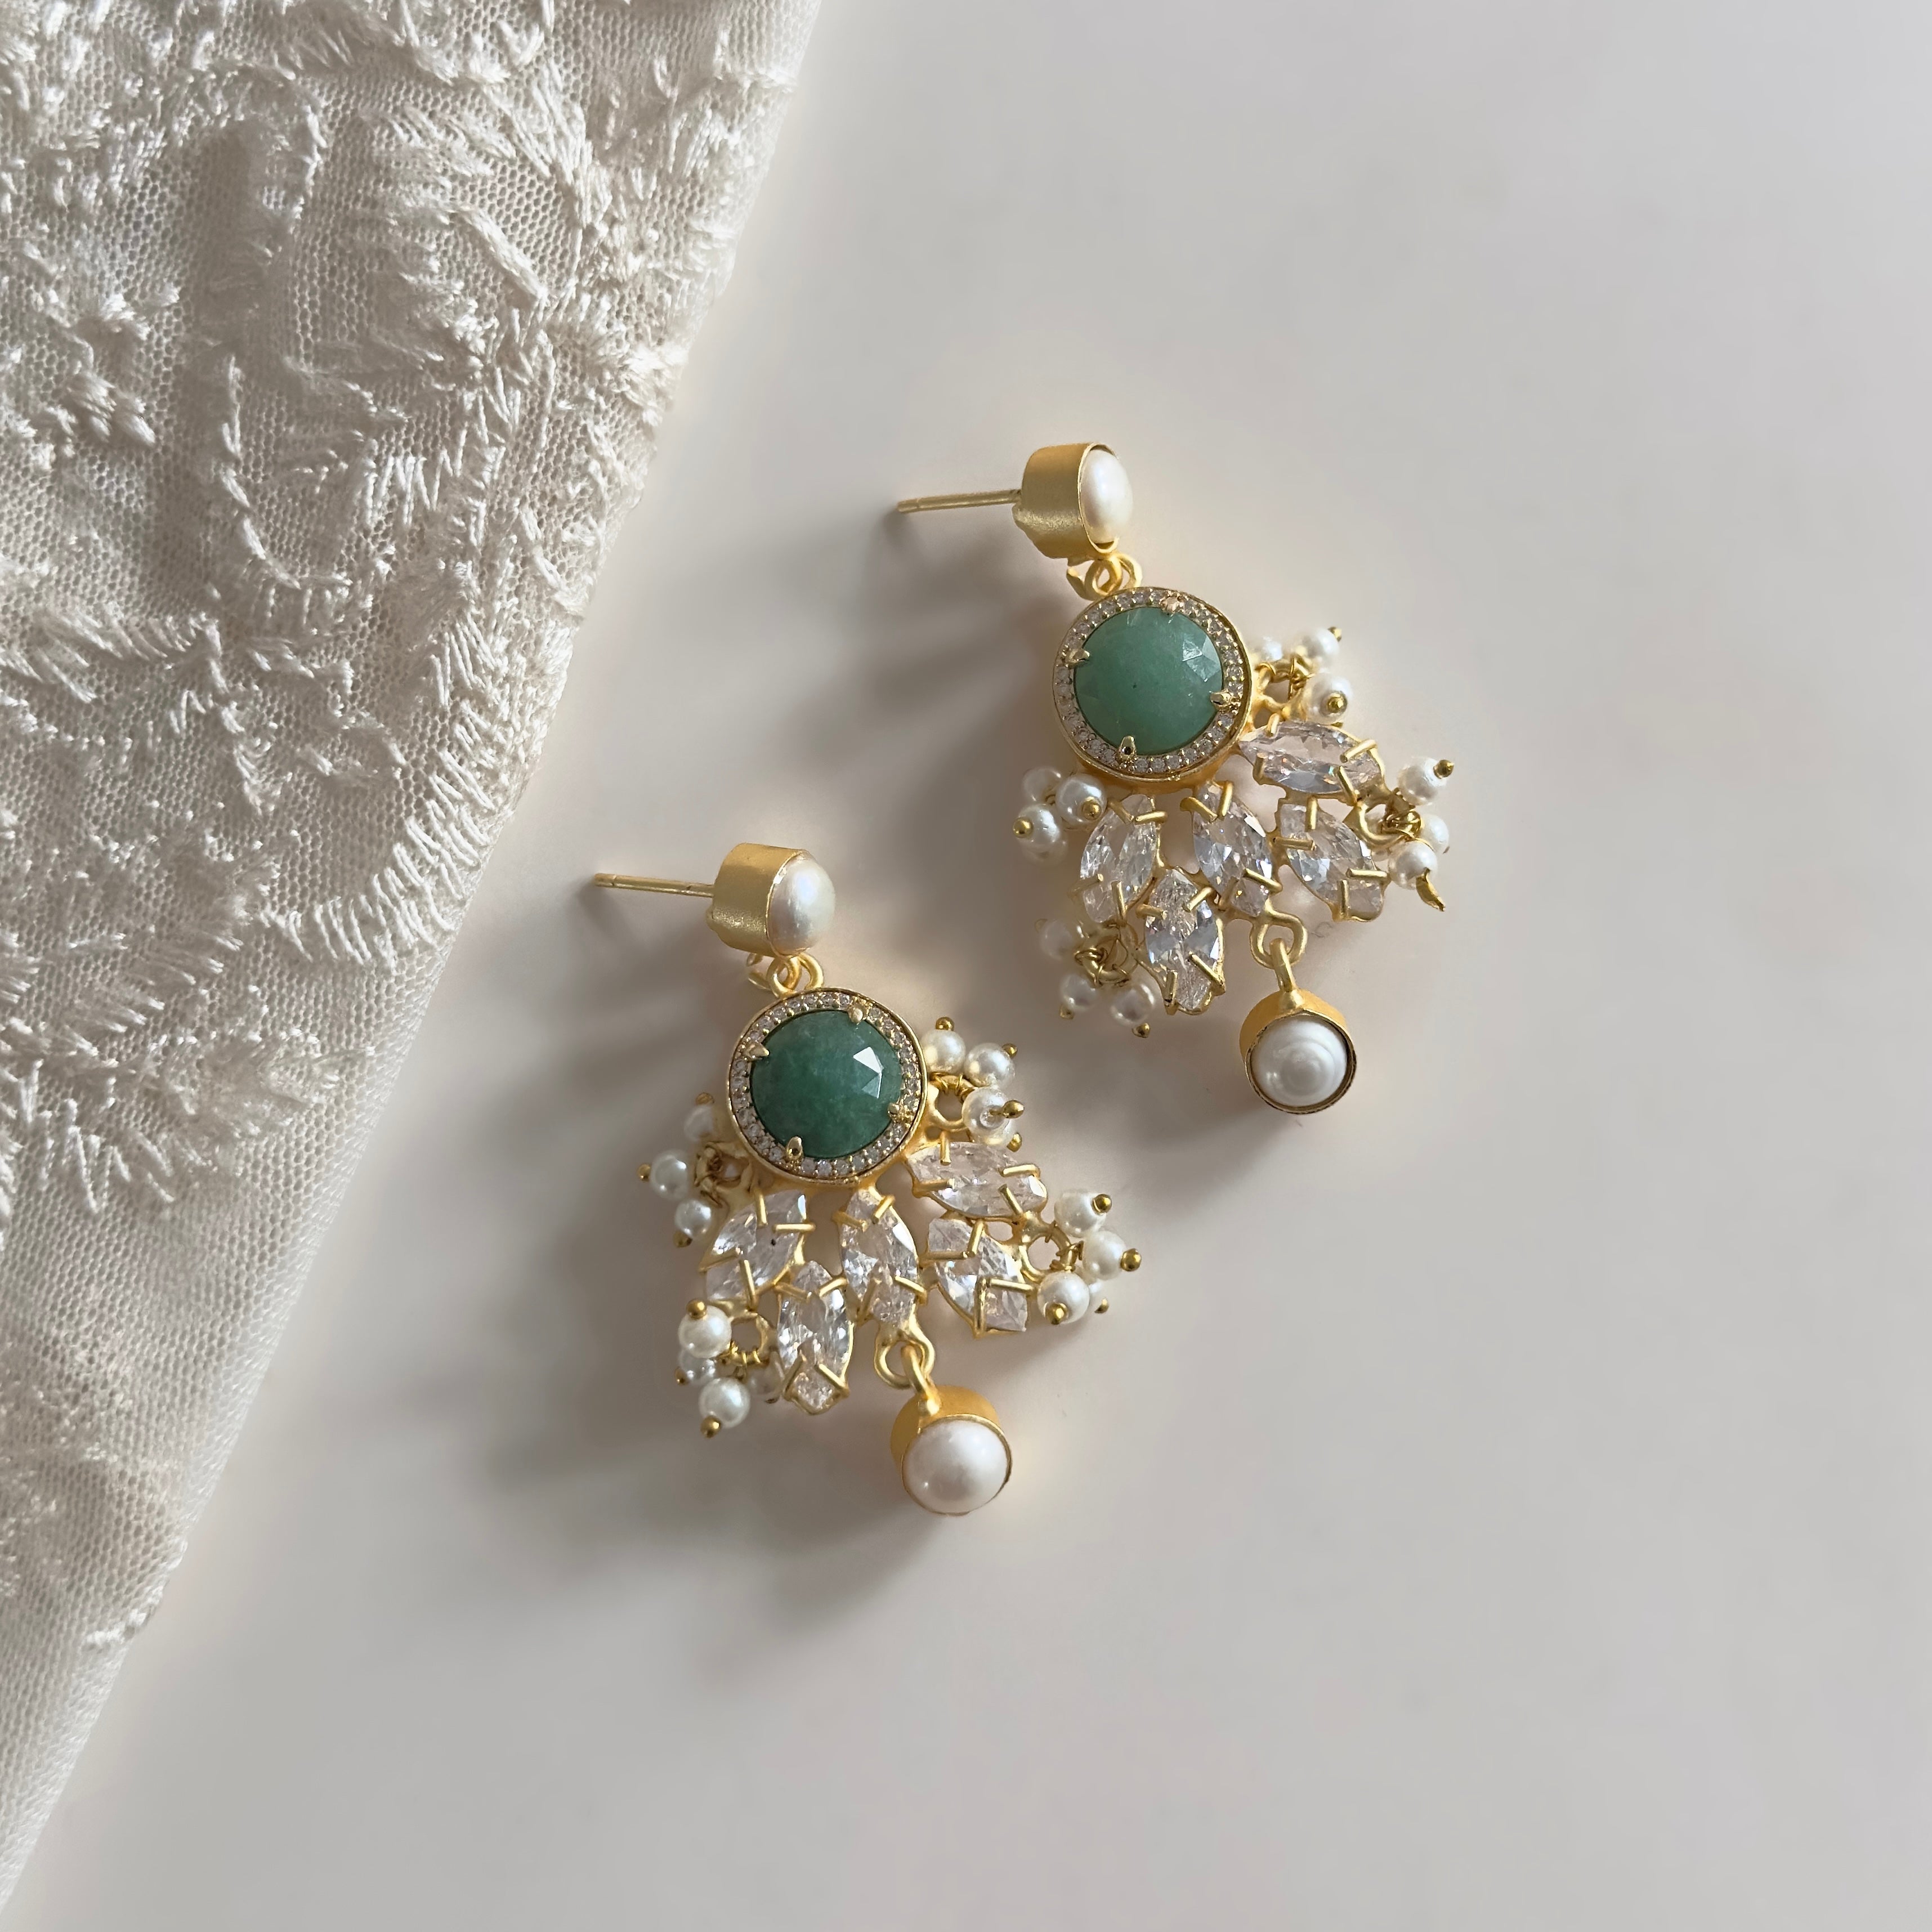 These exquisite Jade Crystal Drop Earrings feature a stunning green aventurine gemstone, complemented by sparkling cz crystals and delicate pearl accents. Indulge in luxury with these handcrafted earrings that add a touch of elegance to any outfit.